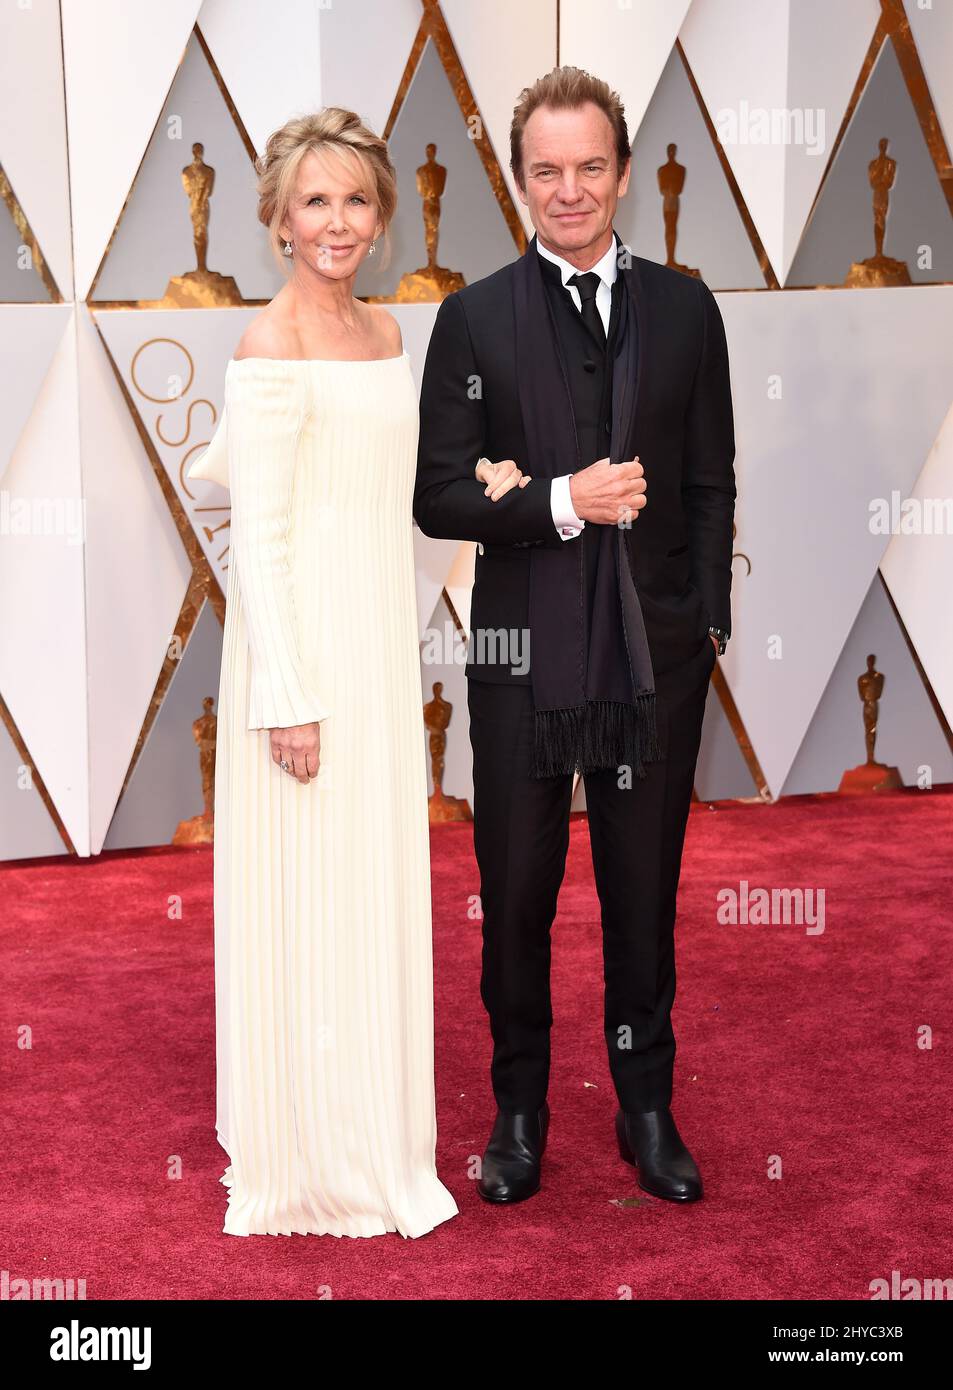 Sting, Trudie Styler at the 89th Academy Awards held at the Dolby Theatre Stock Photo